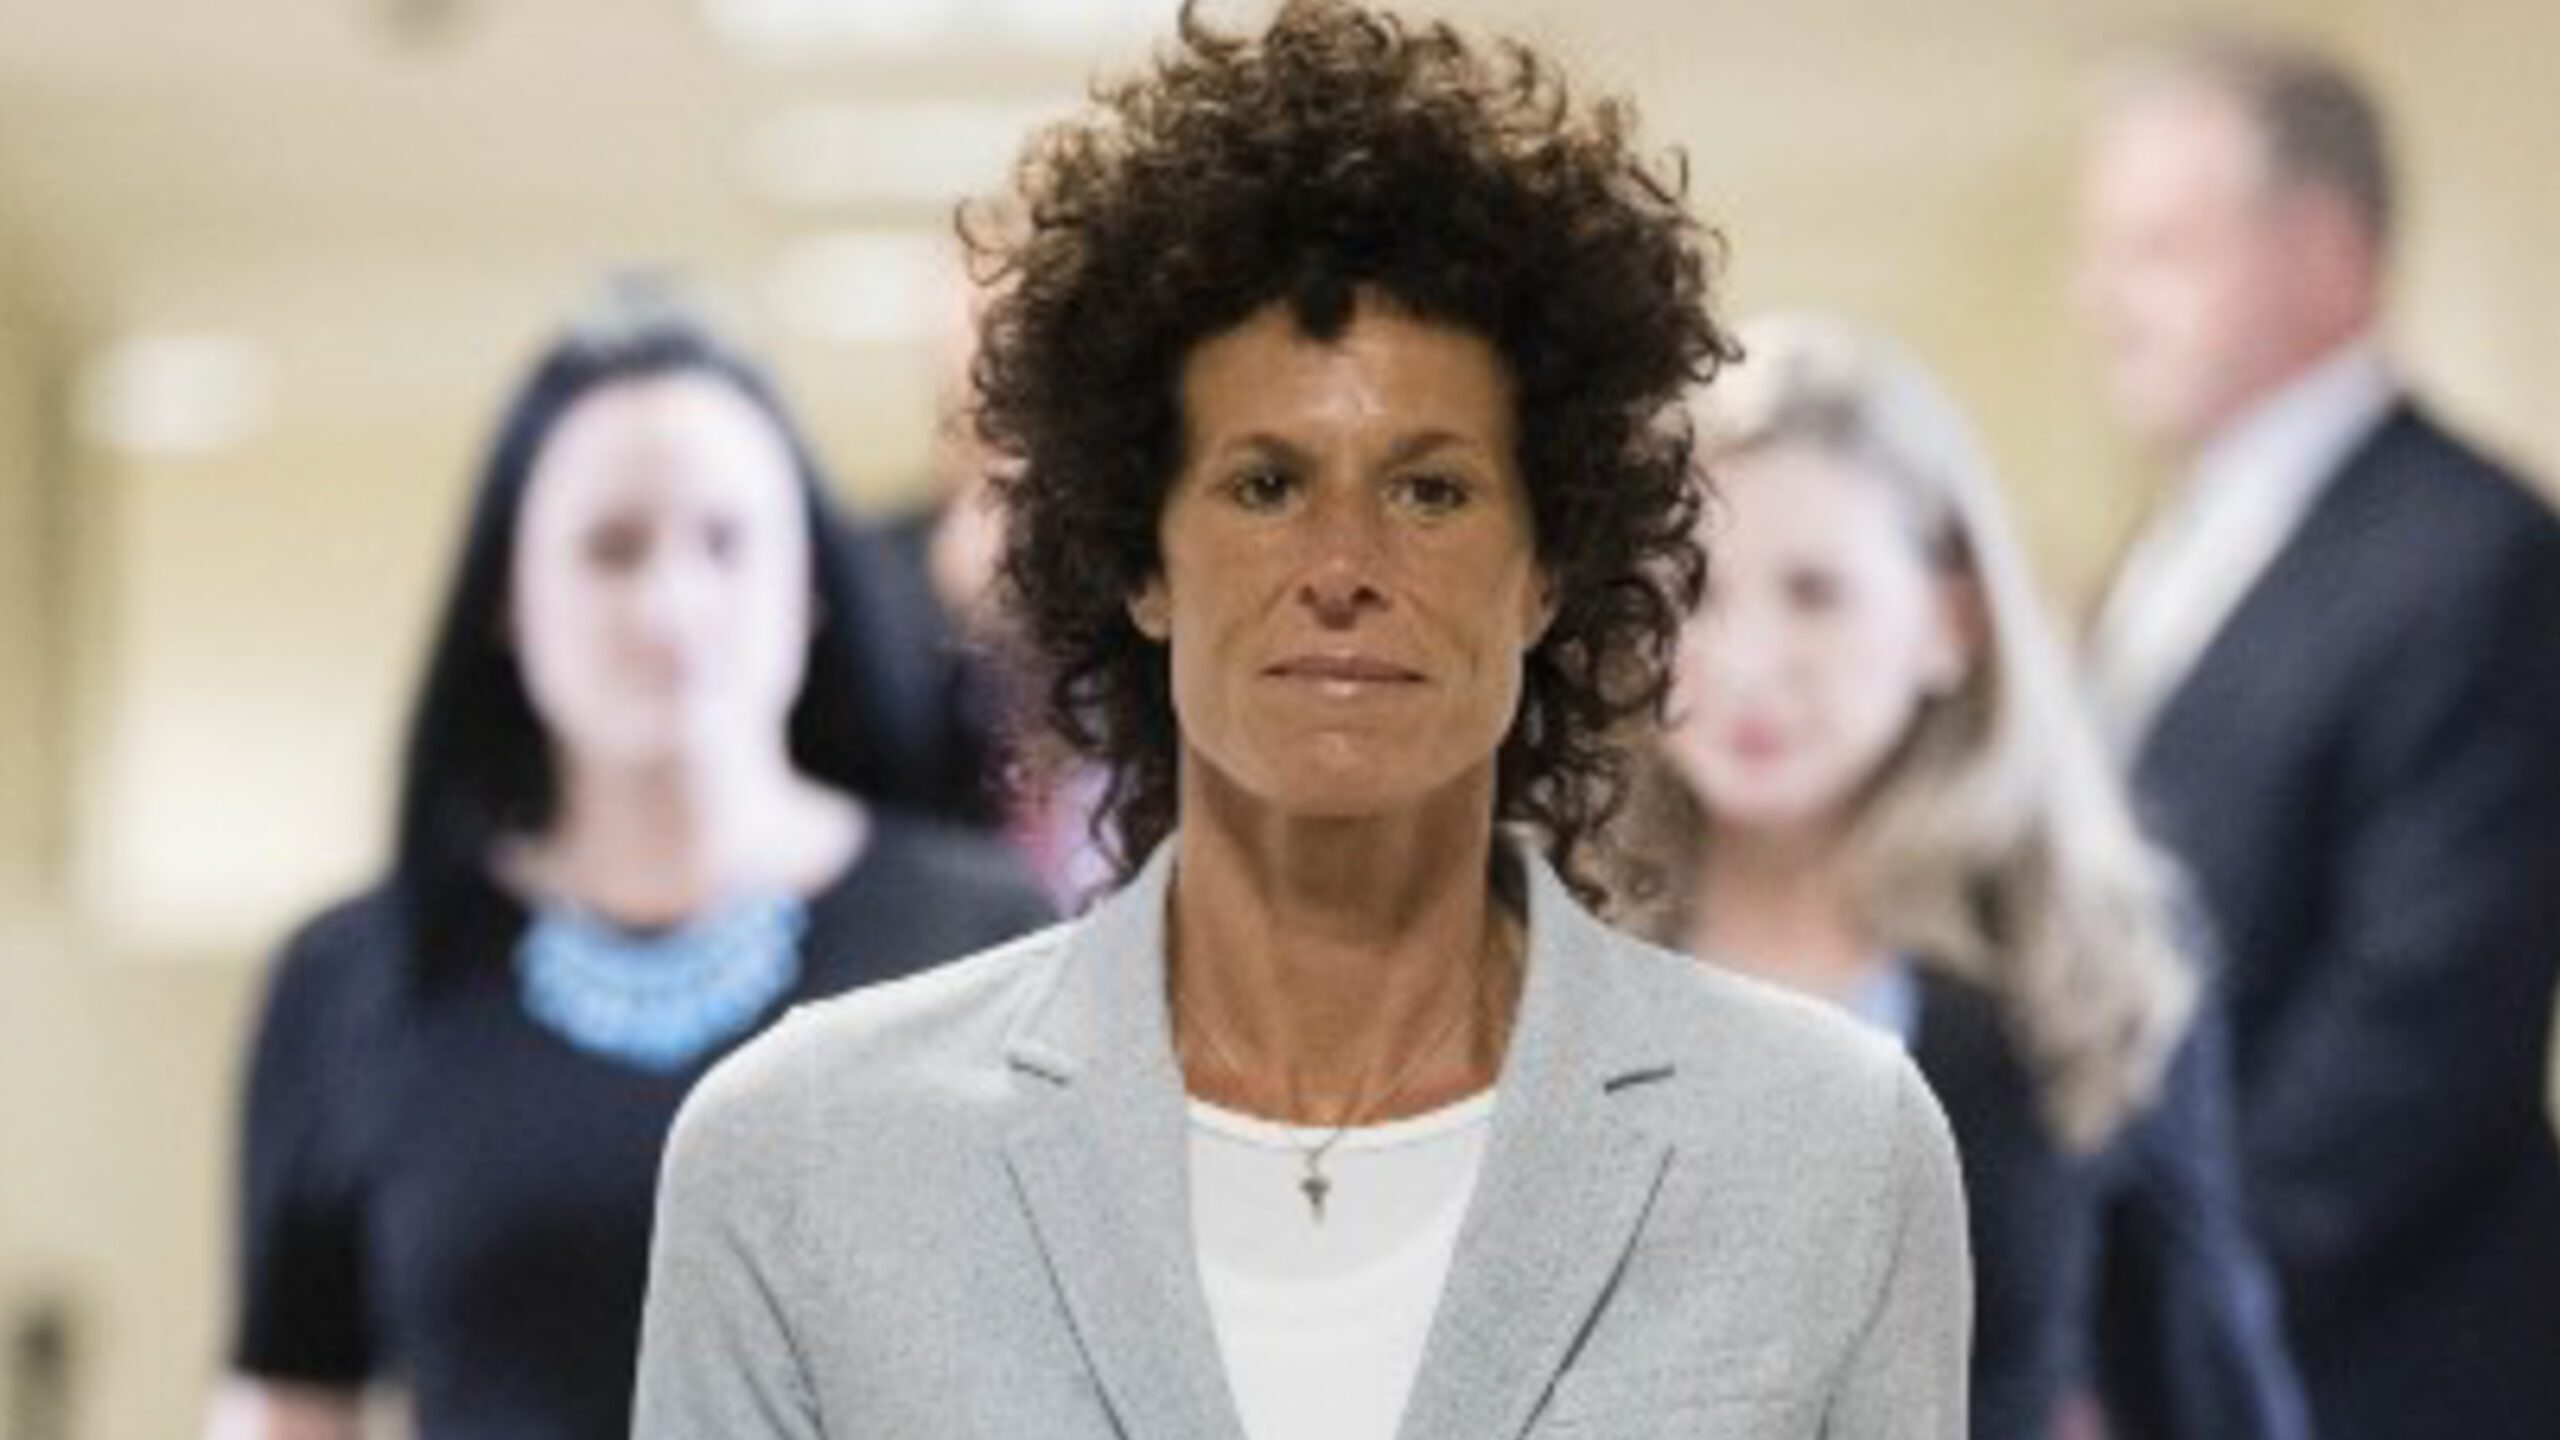 ‘I wanted it to stop,’ Andrea Constand tells Cosby trial